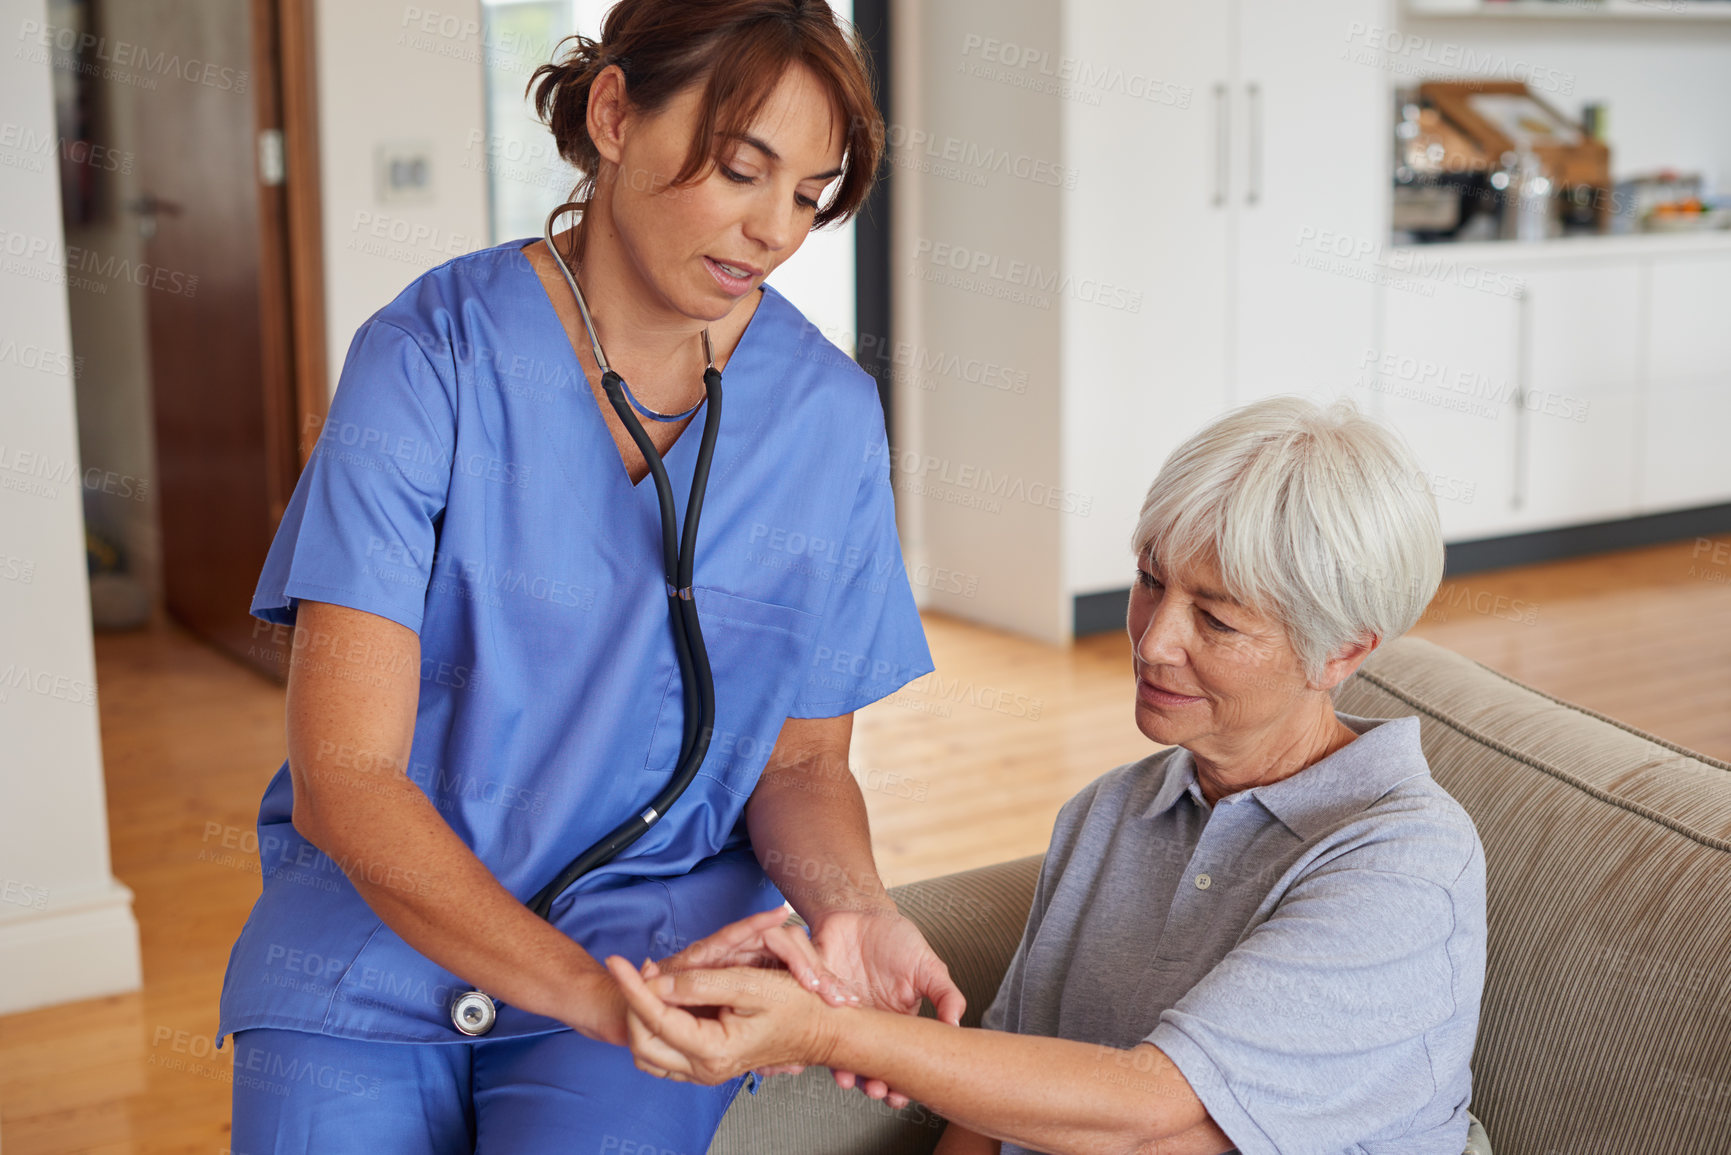 Buy stock photo Cropped shot of a female nurse checking on a senior patient